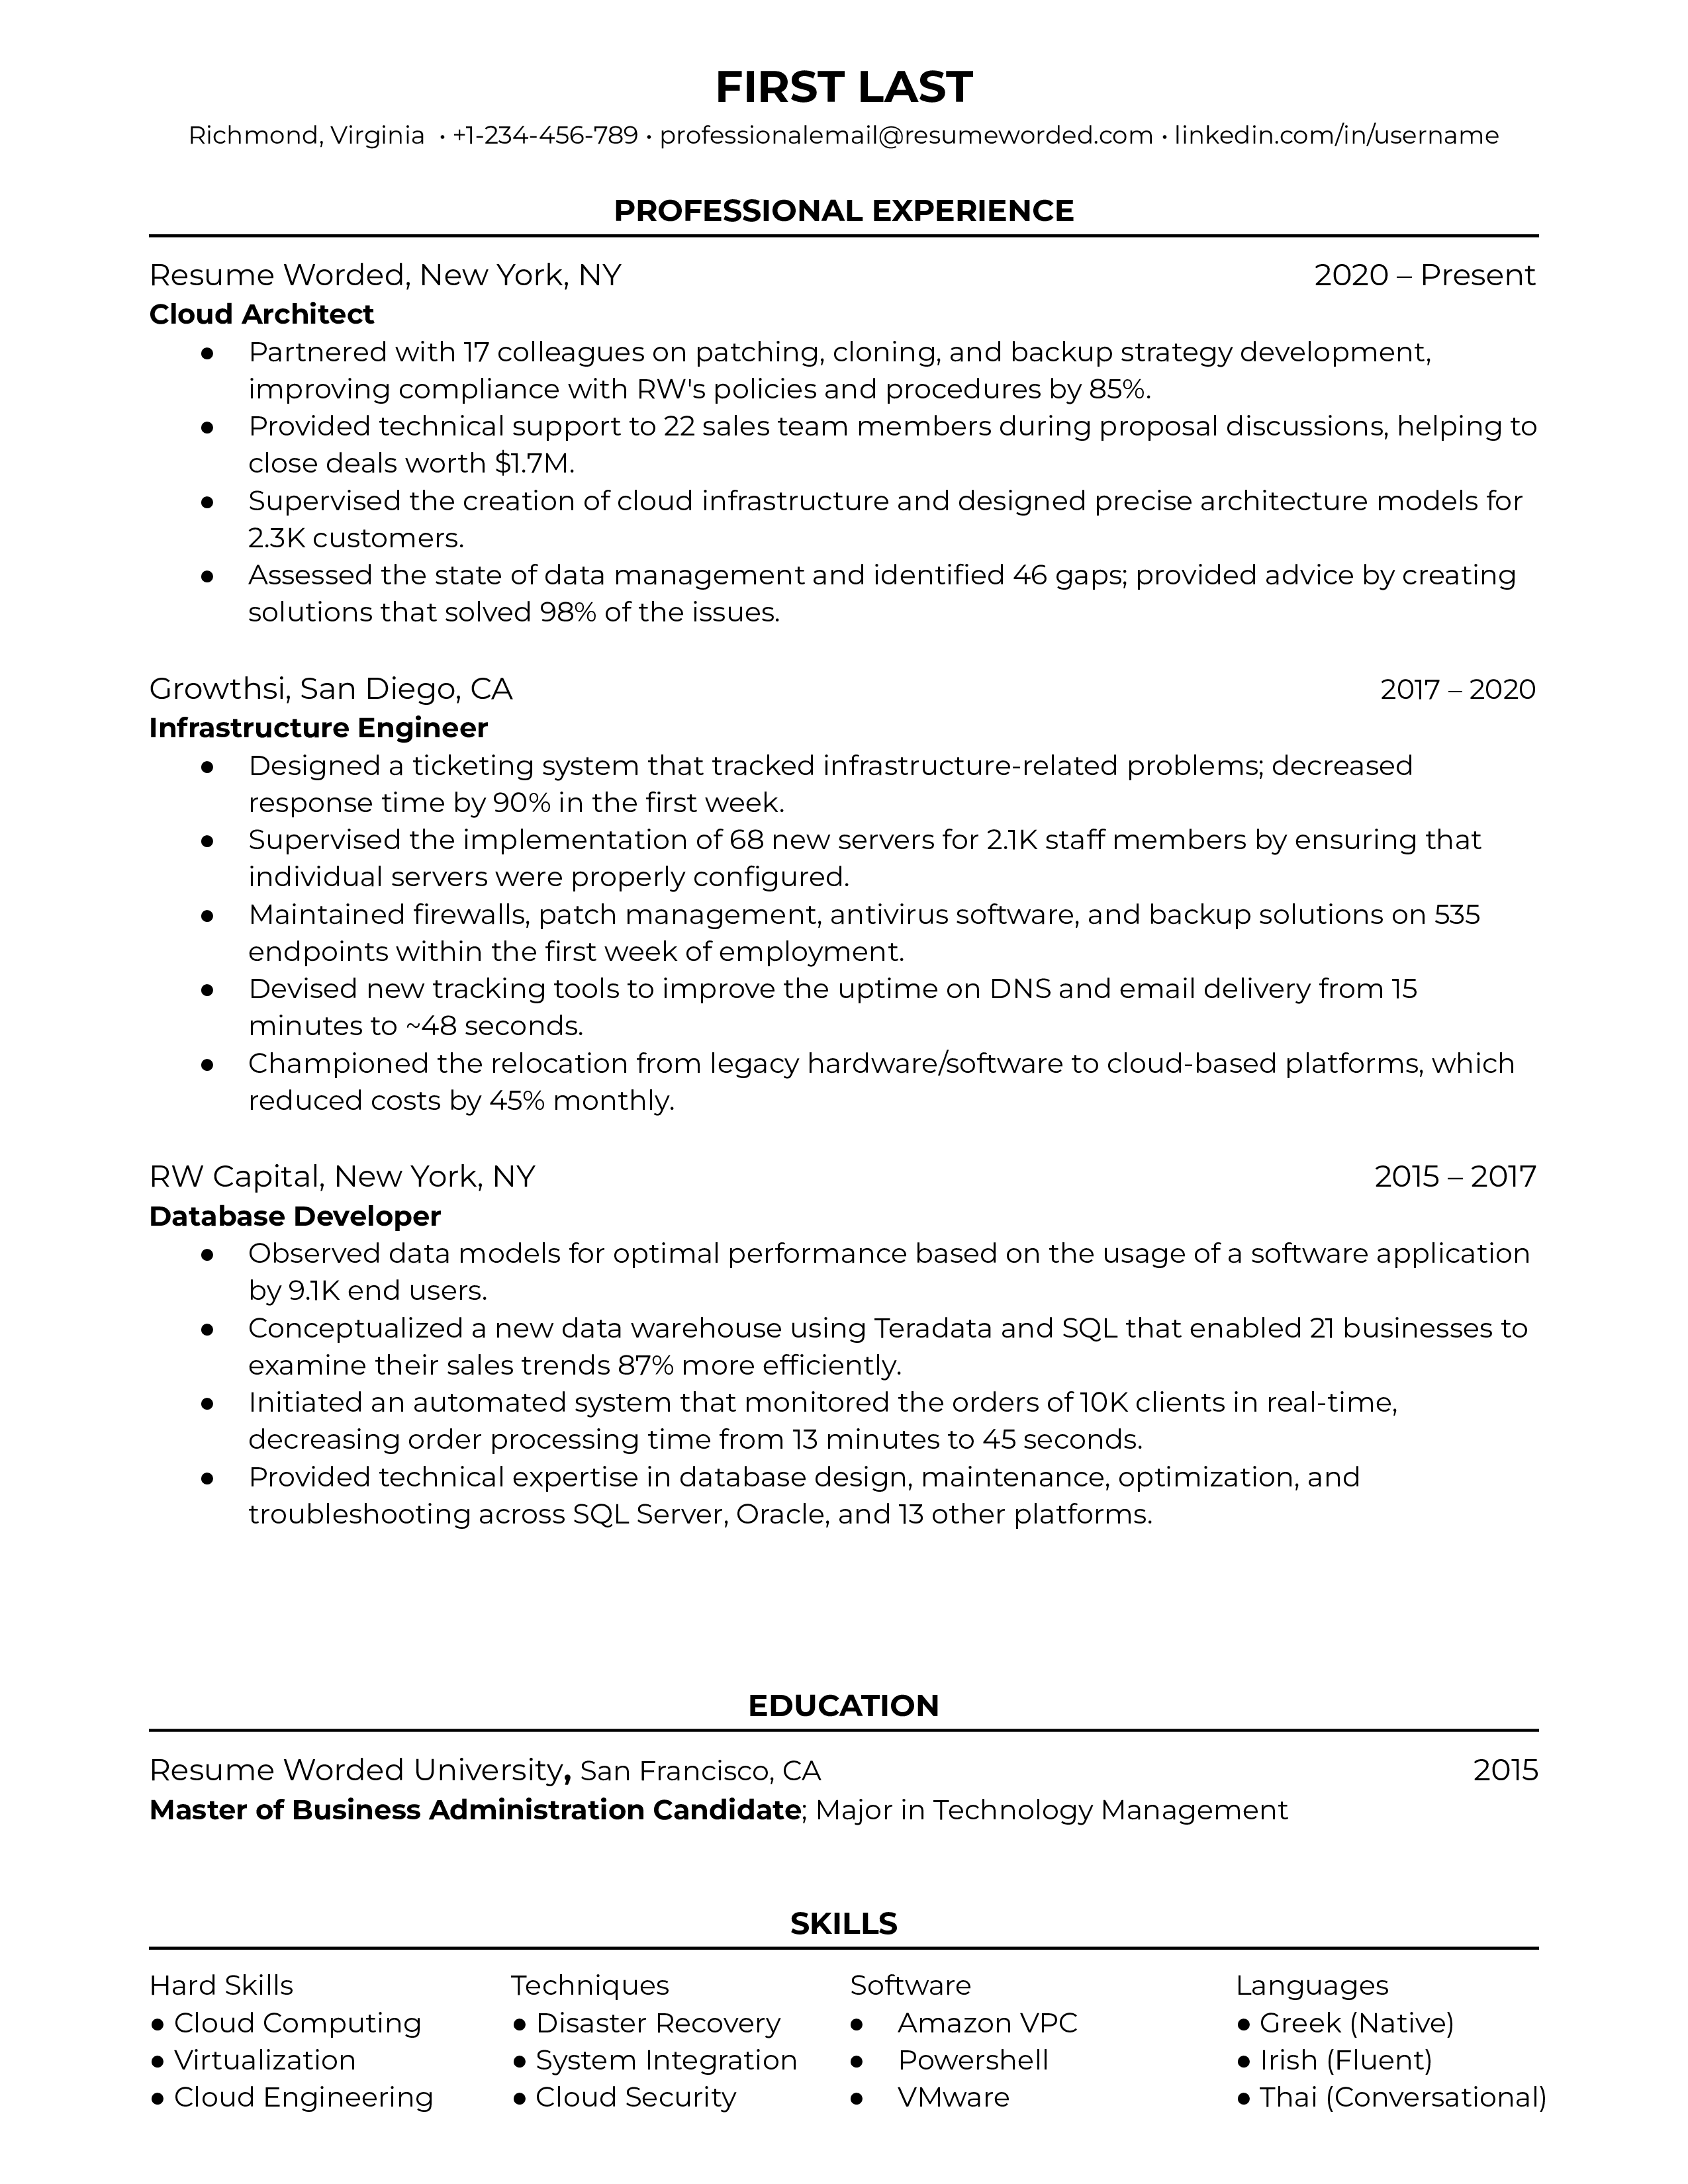 Cloud Architect resume emphasizing certifications and multi-platform experience